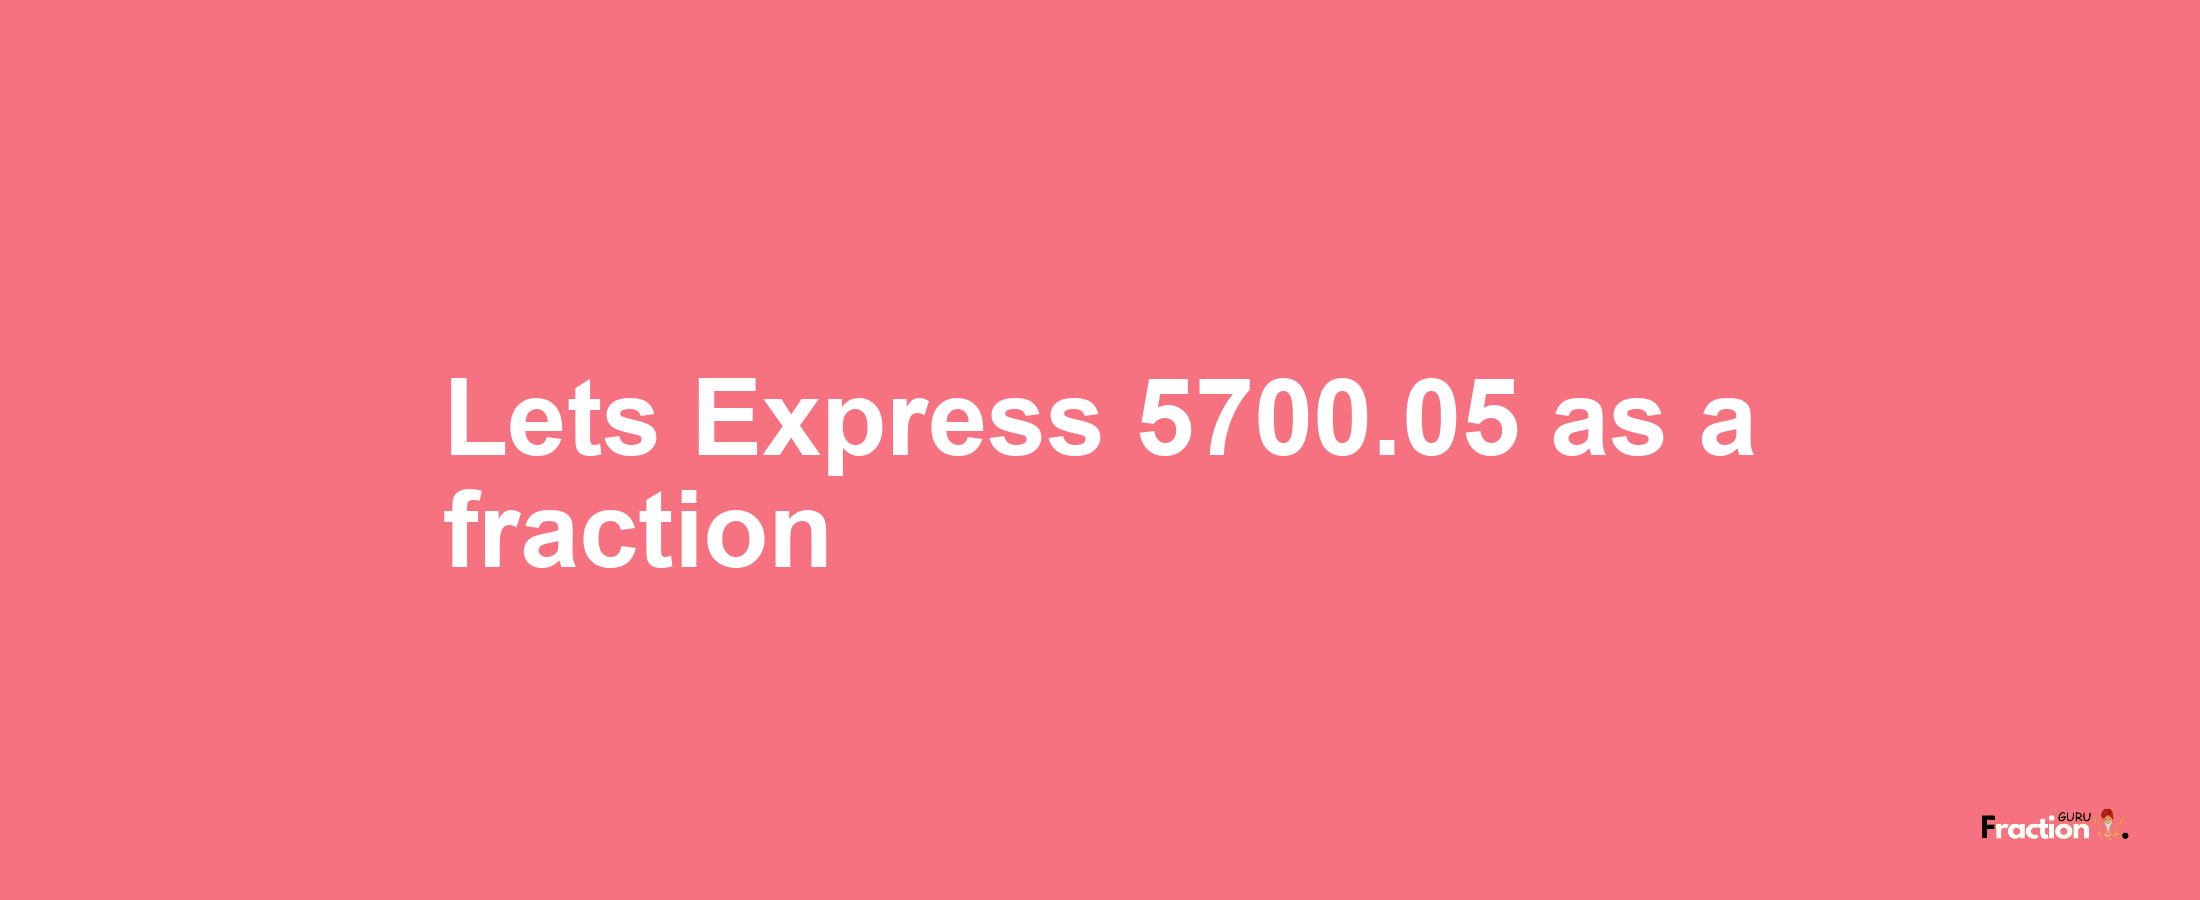 Lets Express 5700.05 as afraction